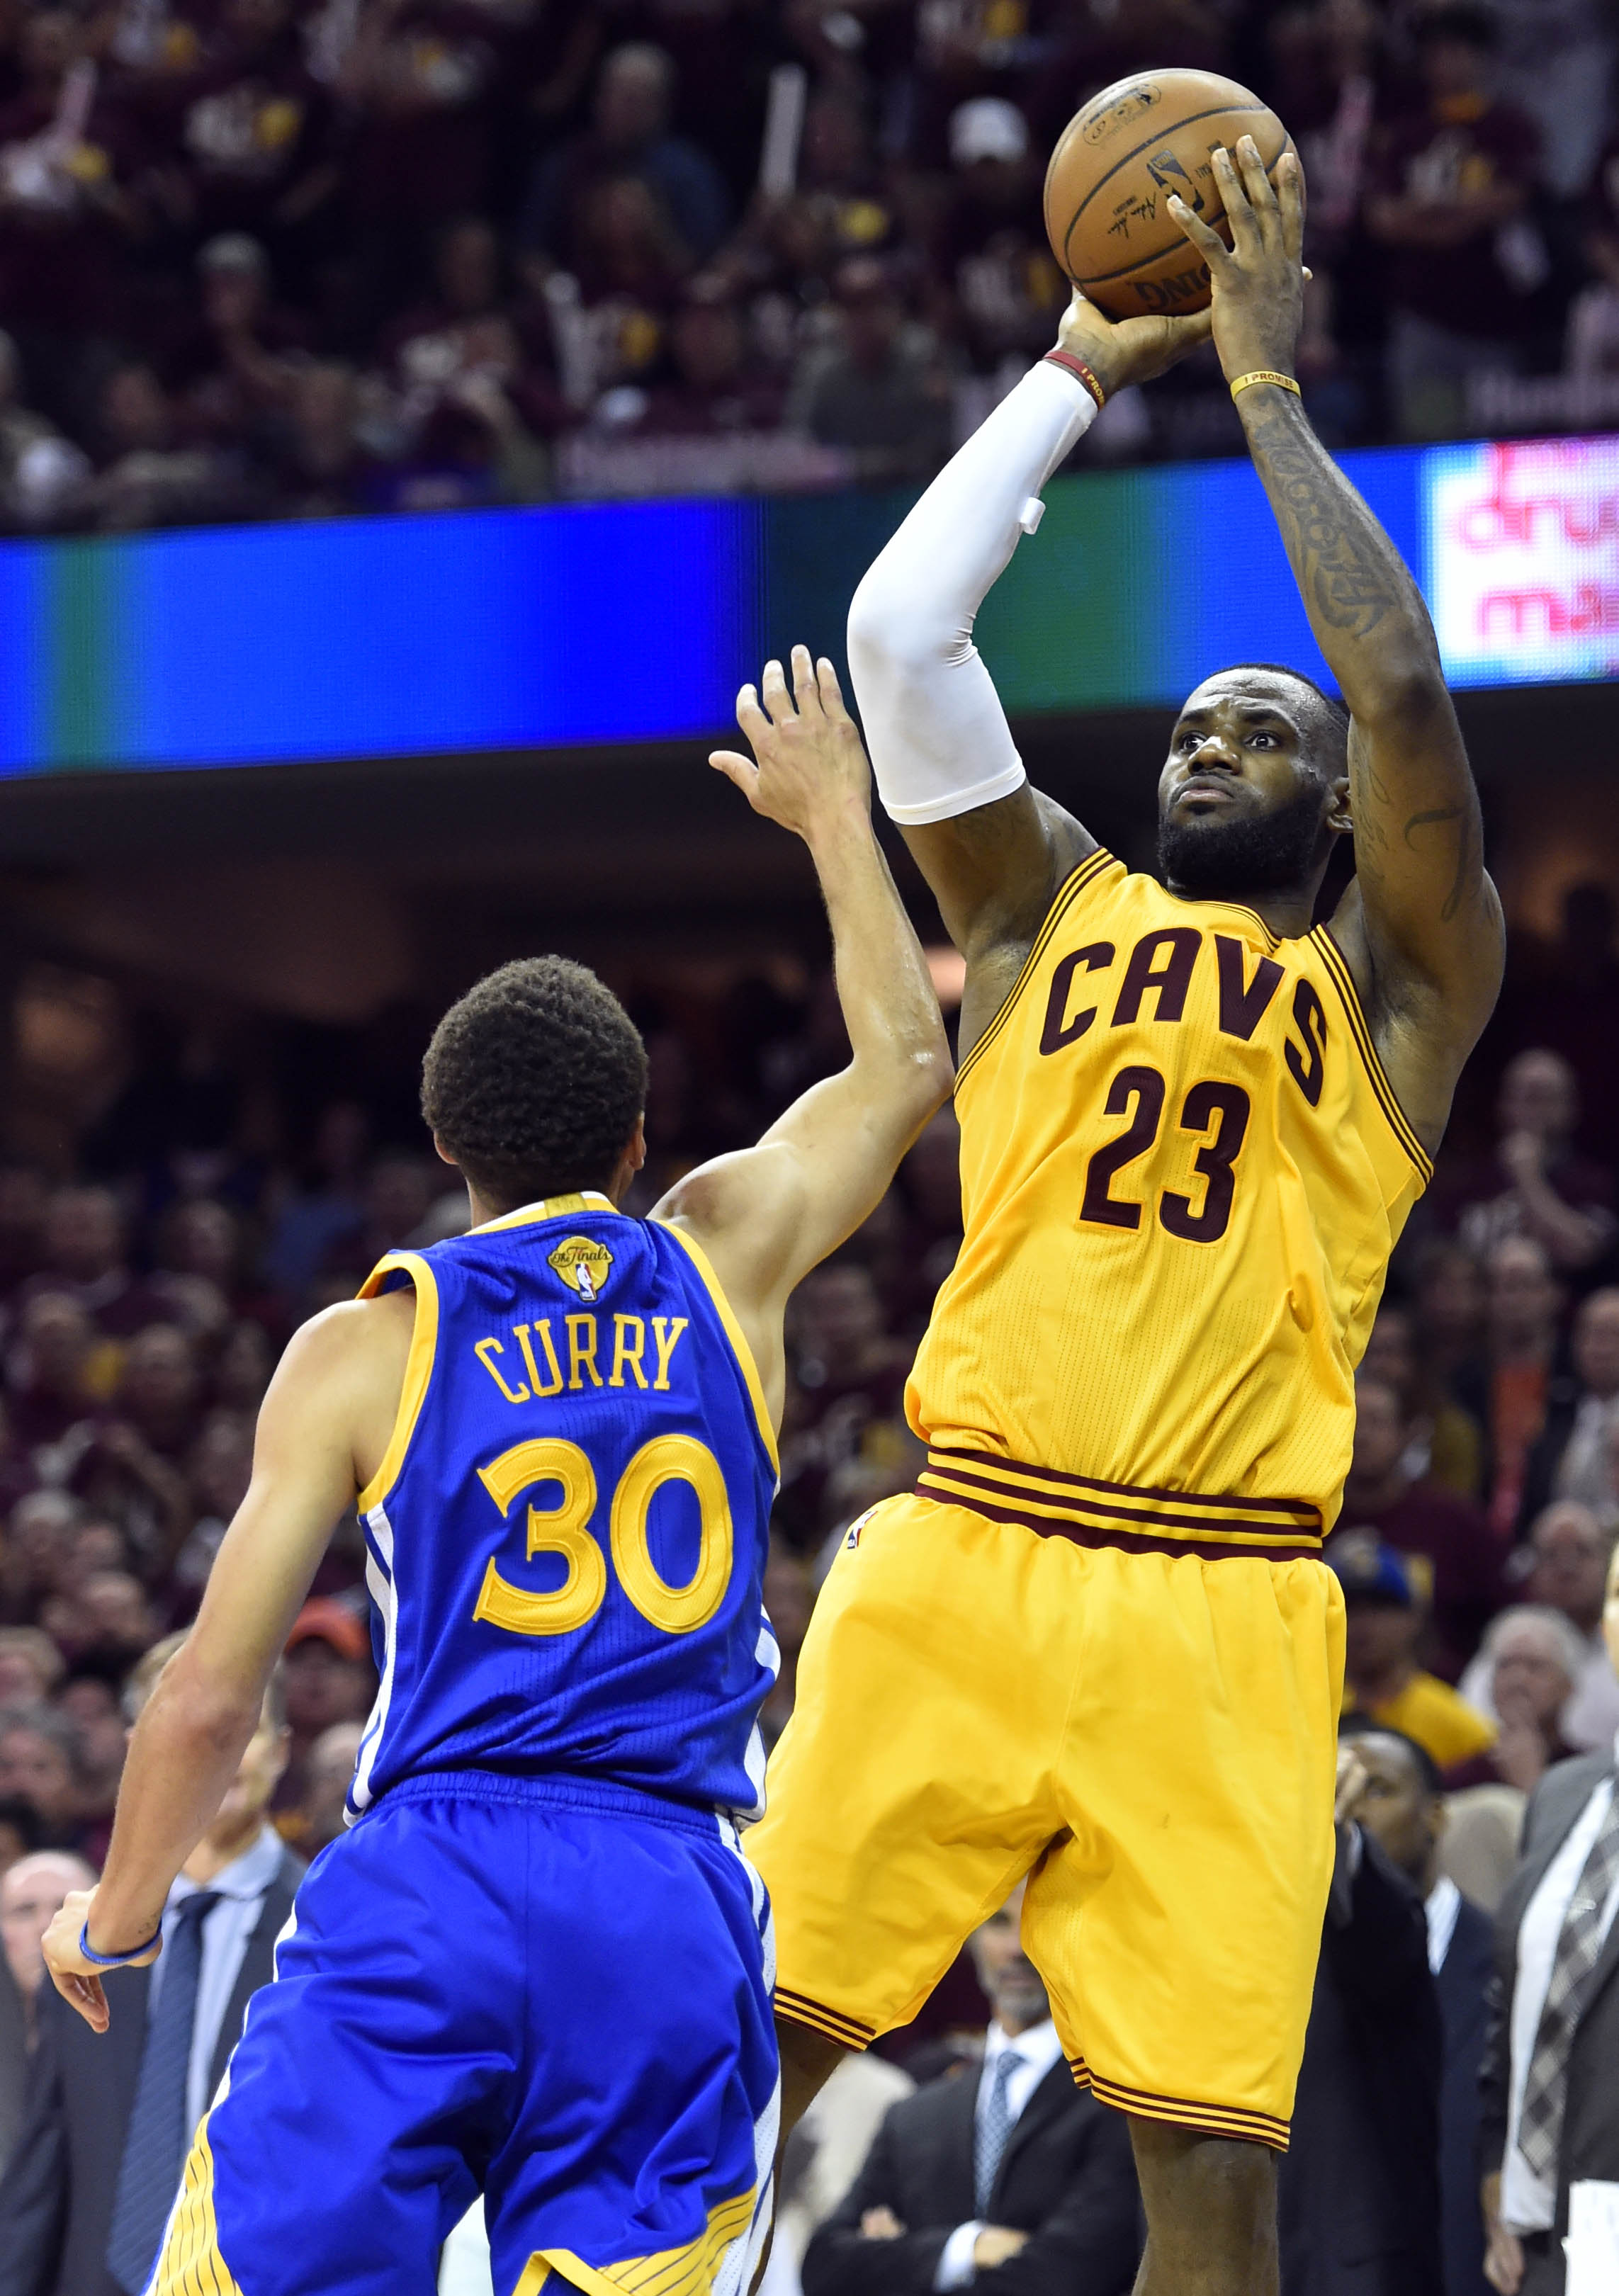 Lebron James Vs Steph Curry An Nba Finals Rivalry Renewed 